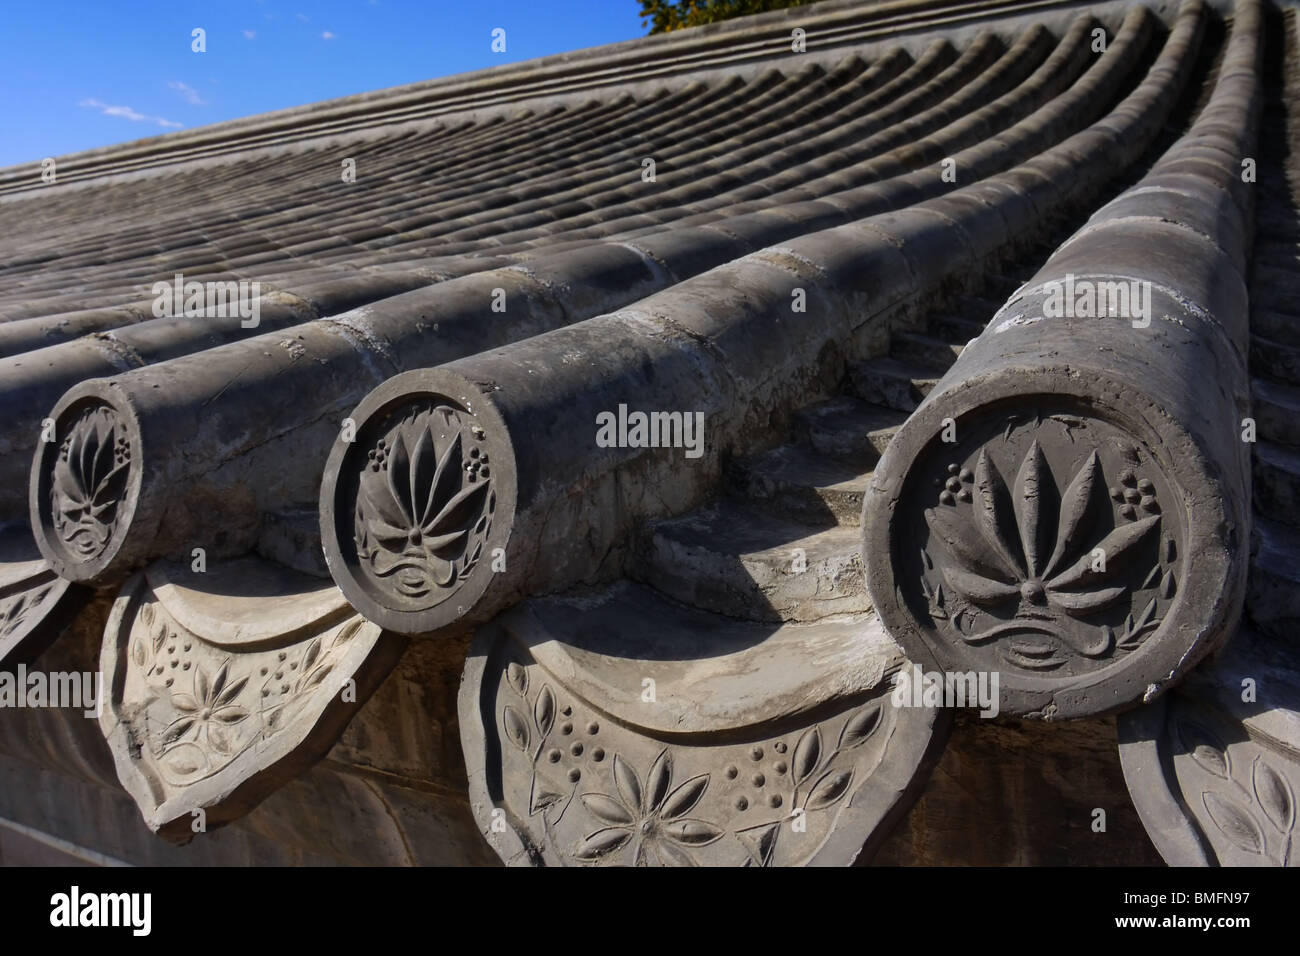 Tiled roof of traditional hutong family courtyard house in Beijing, China Stock Photo